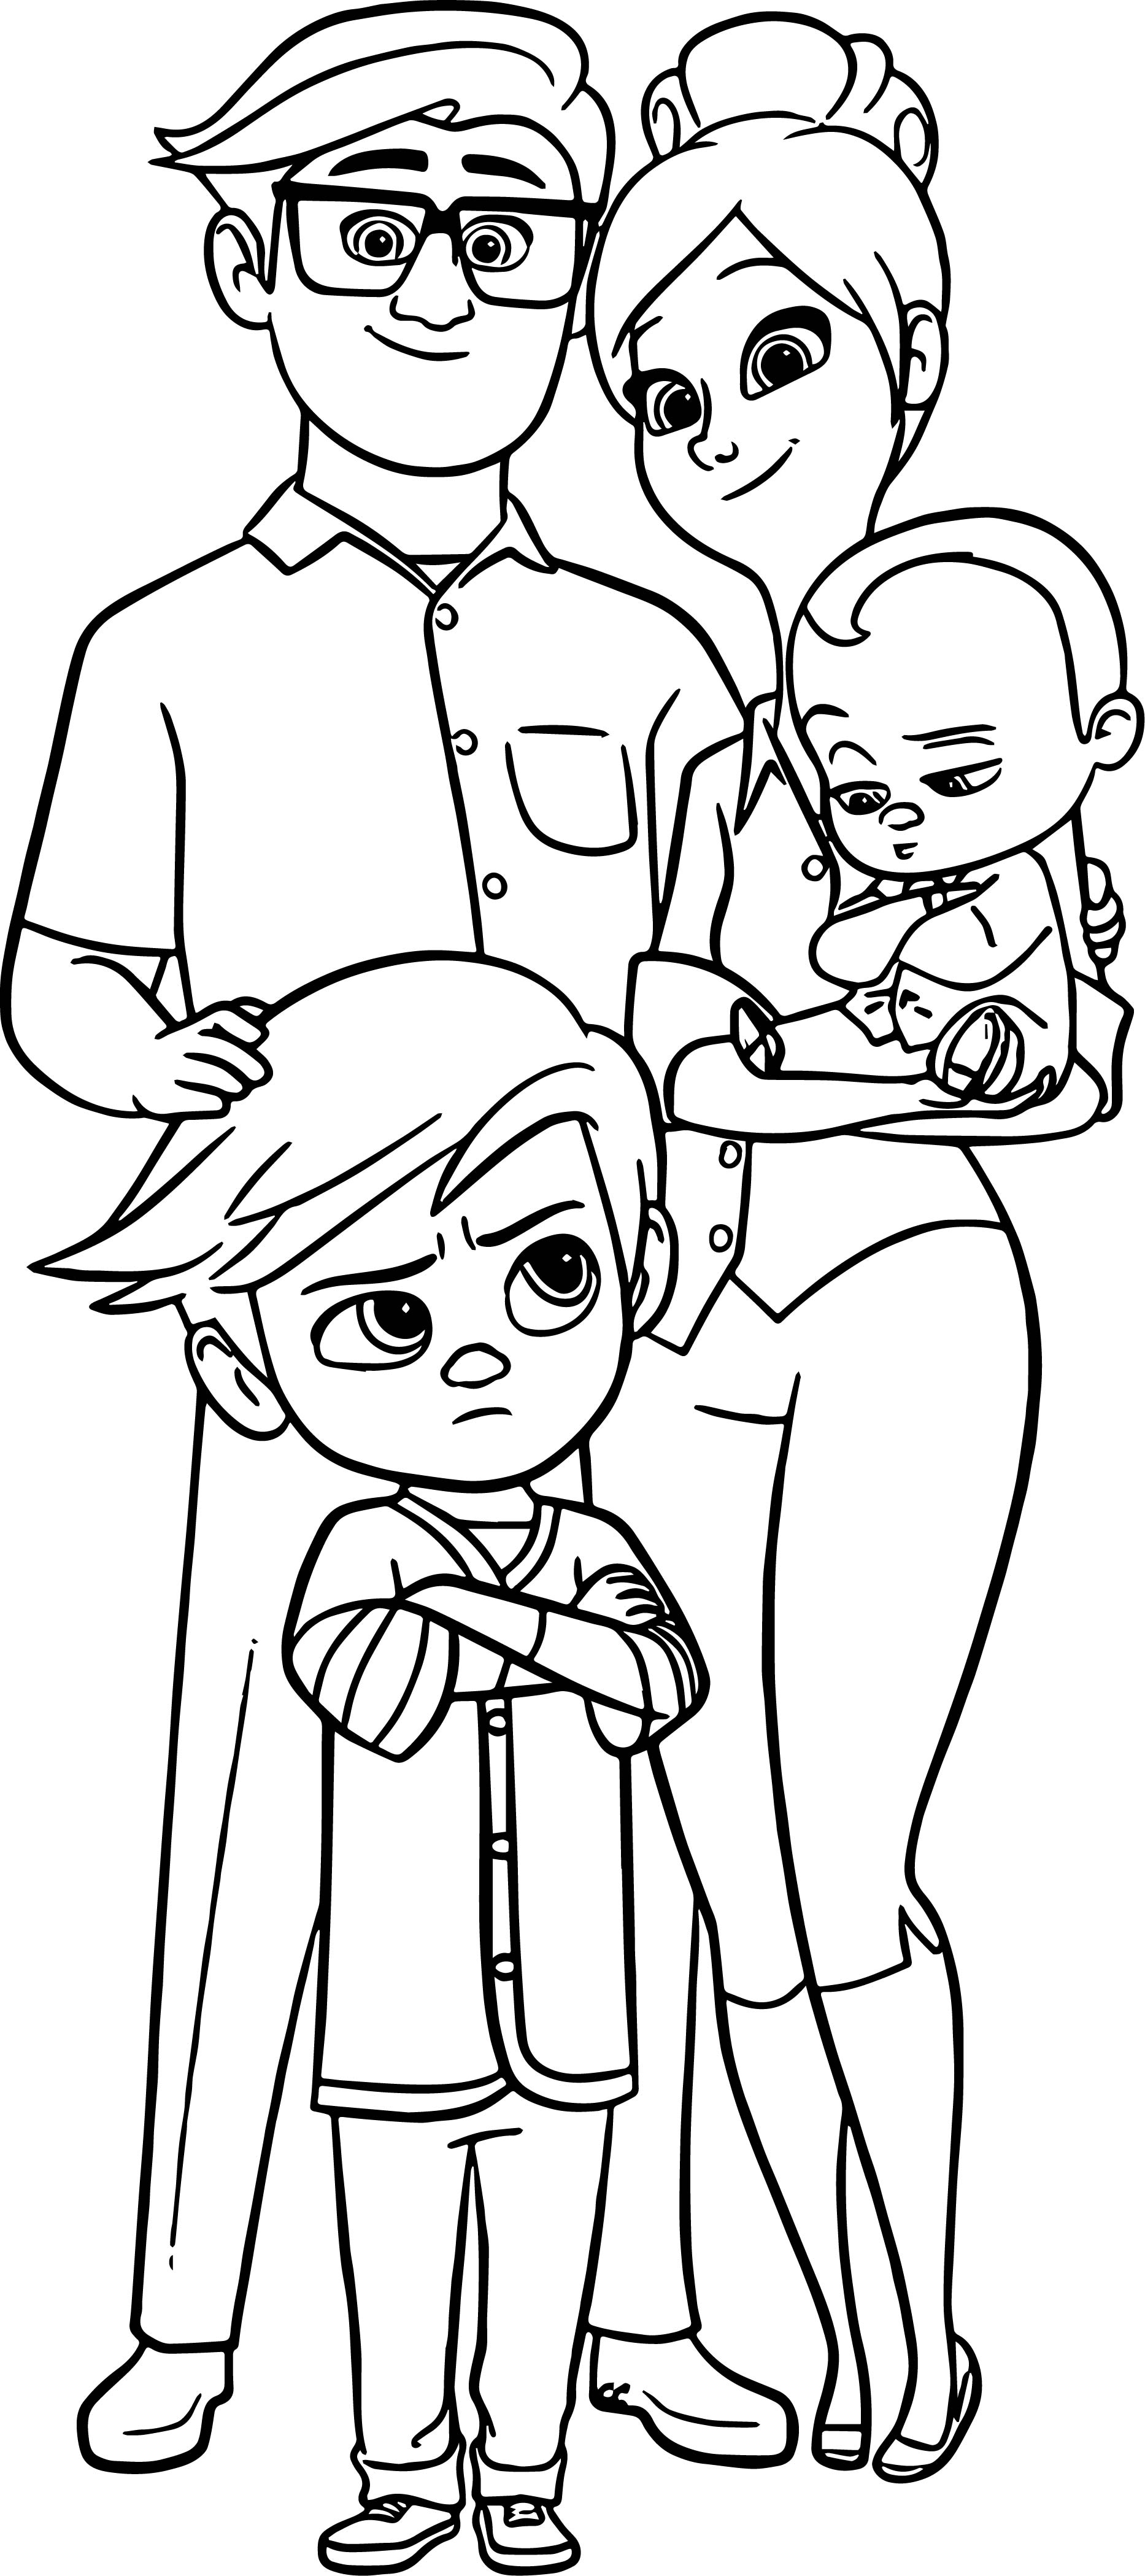 family-people-coloring-coloring-pages